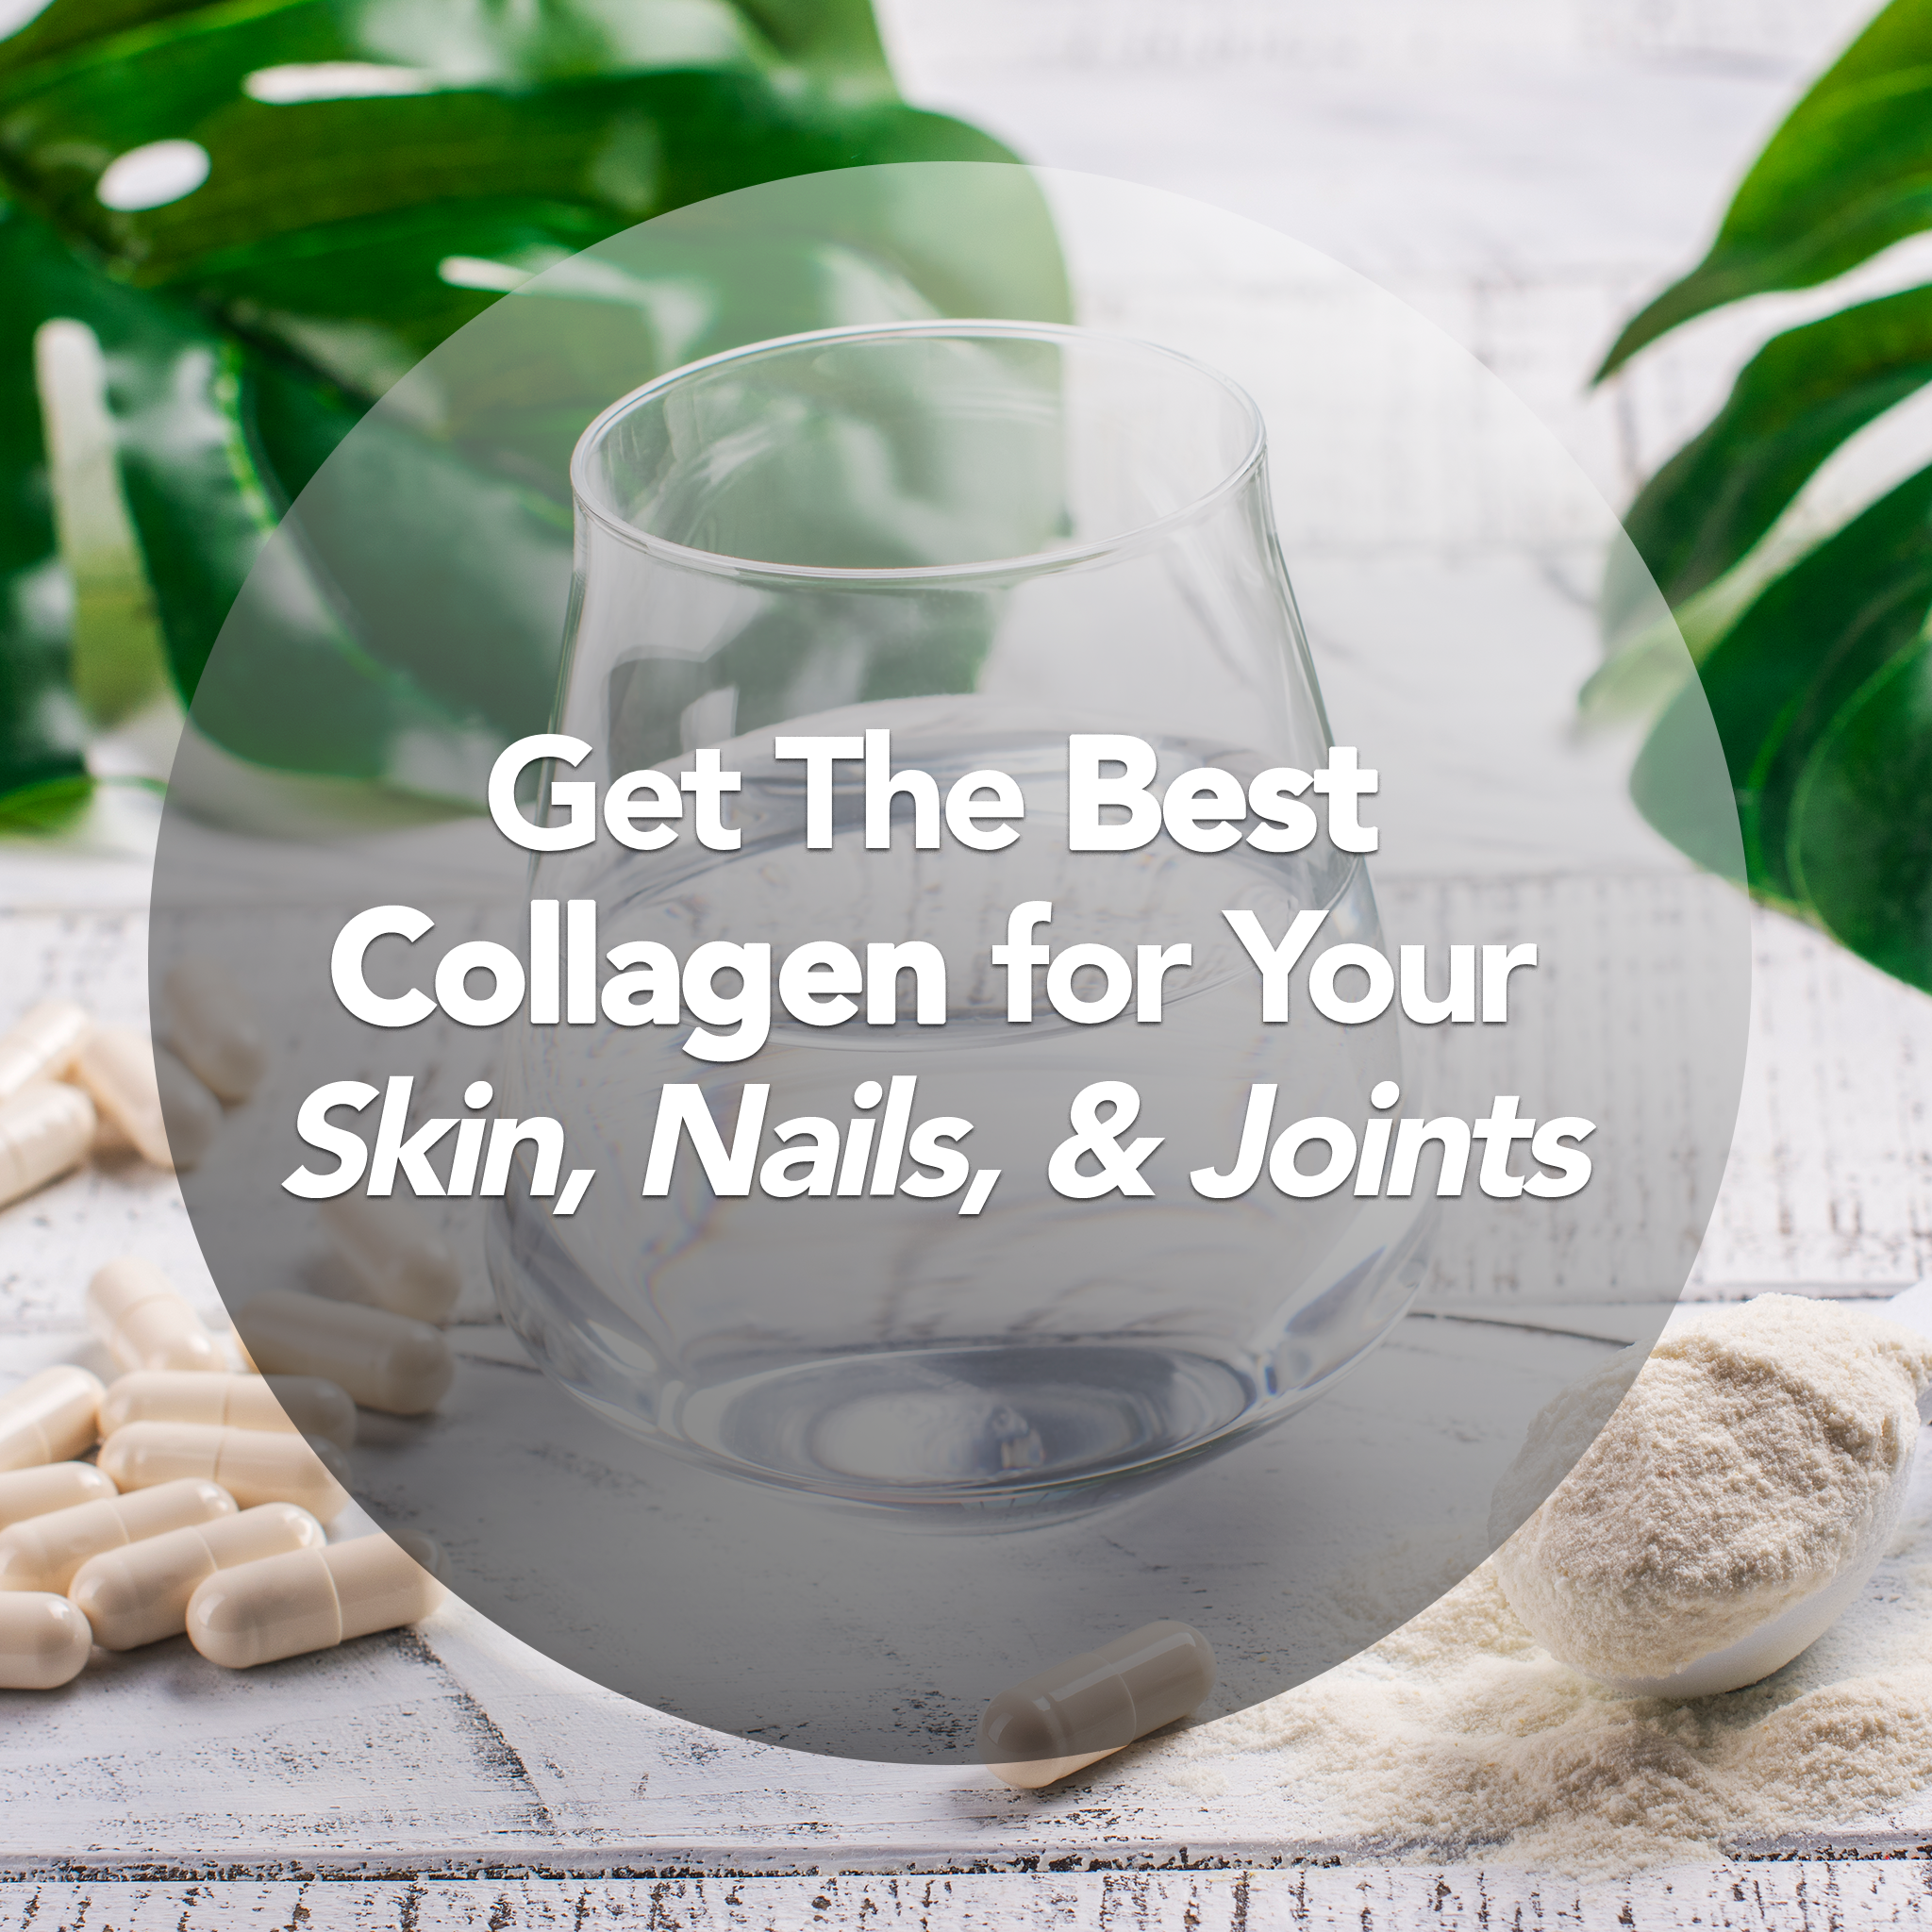 Collagen Benefits For Skin and Nails - Life Extension